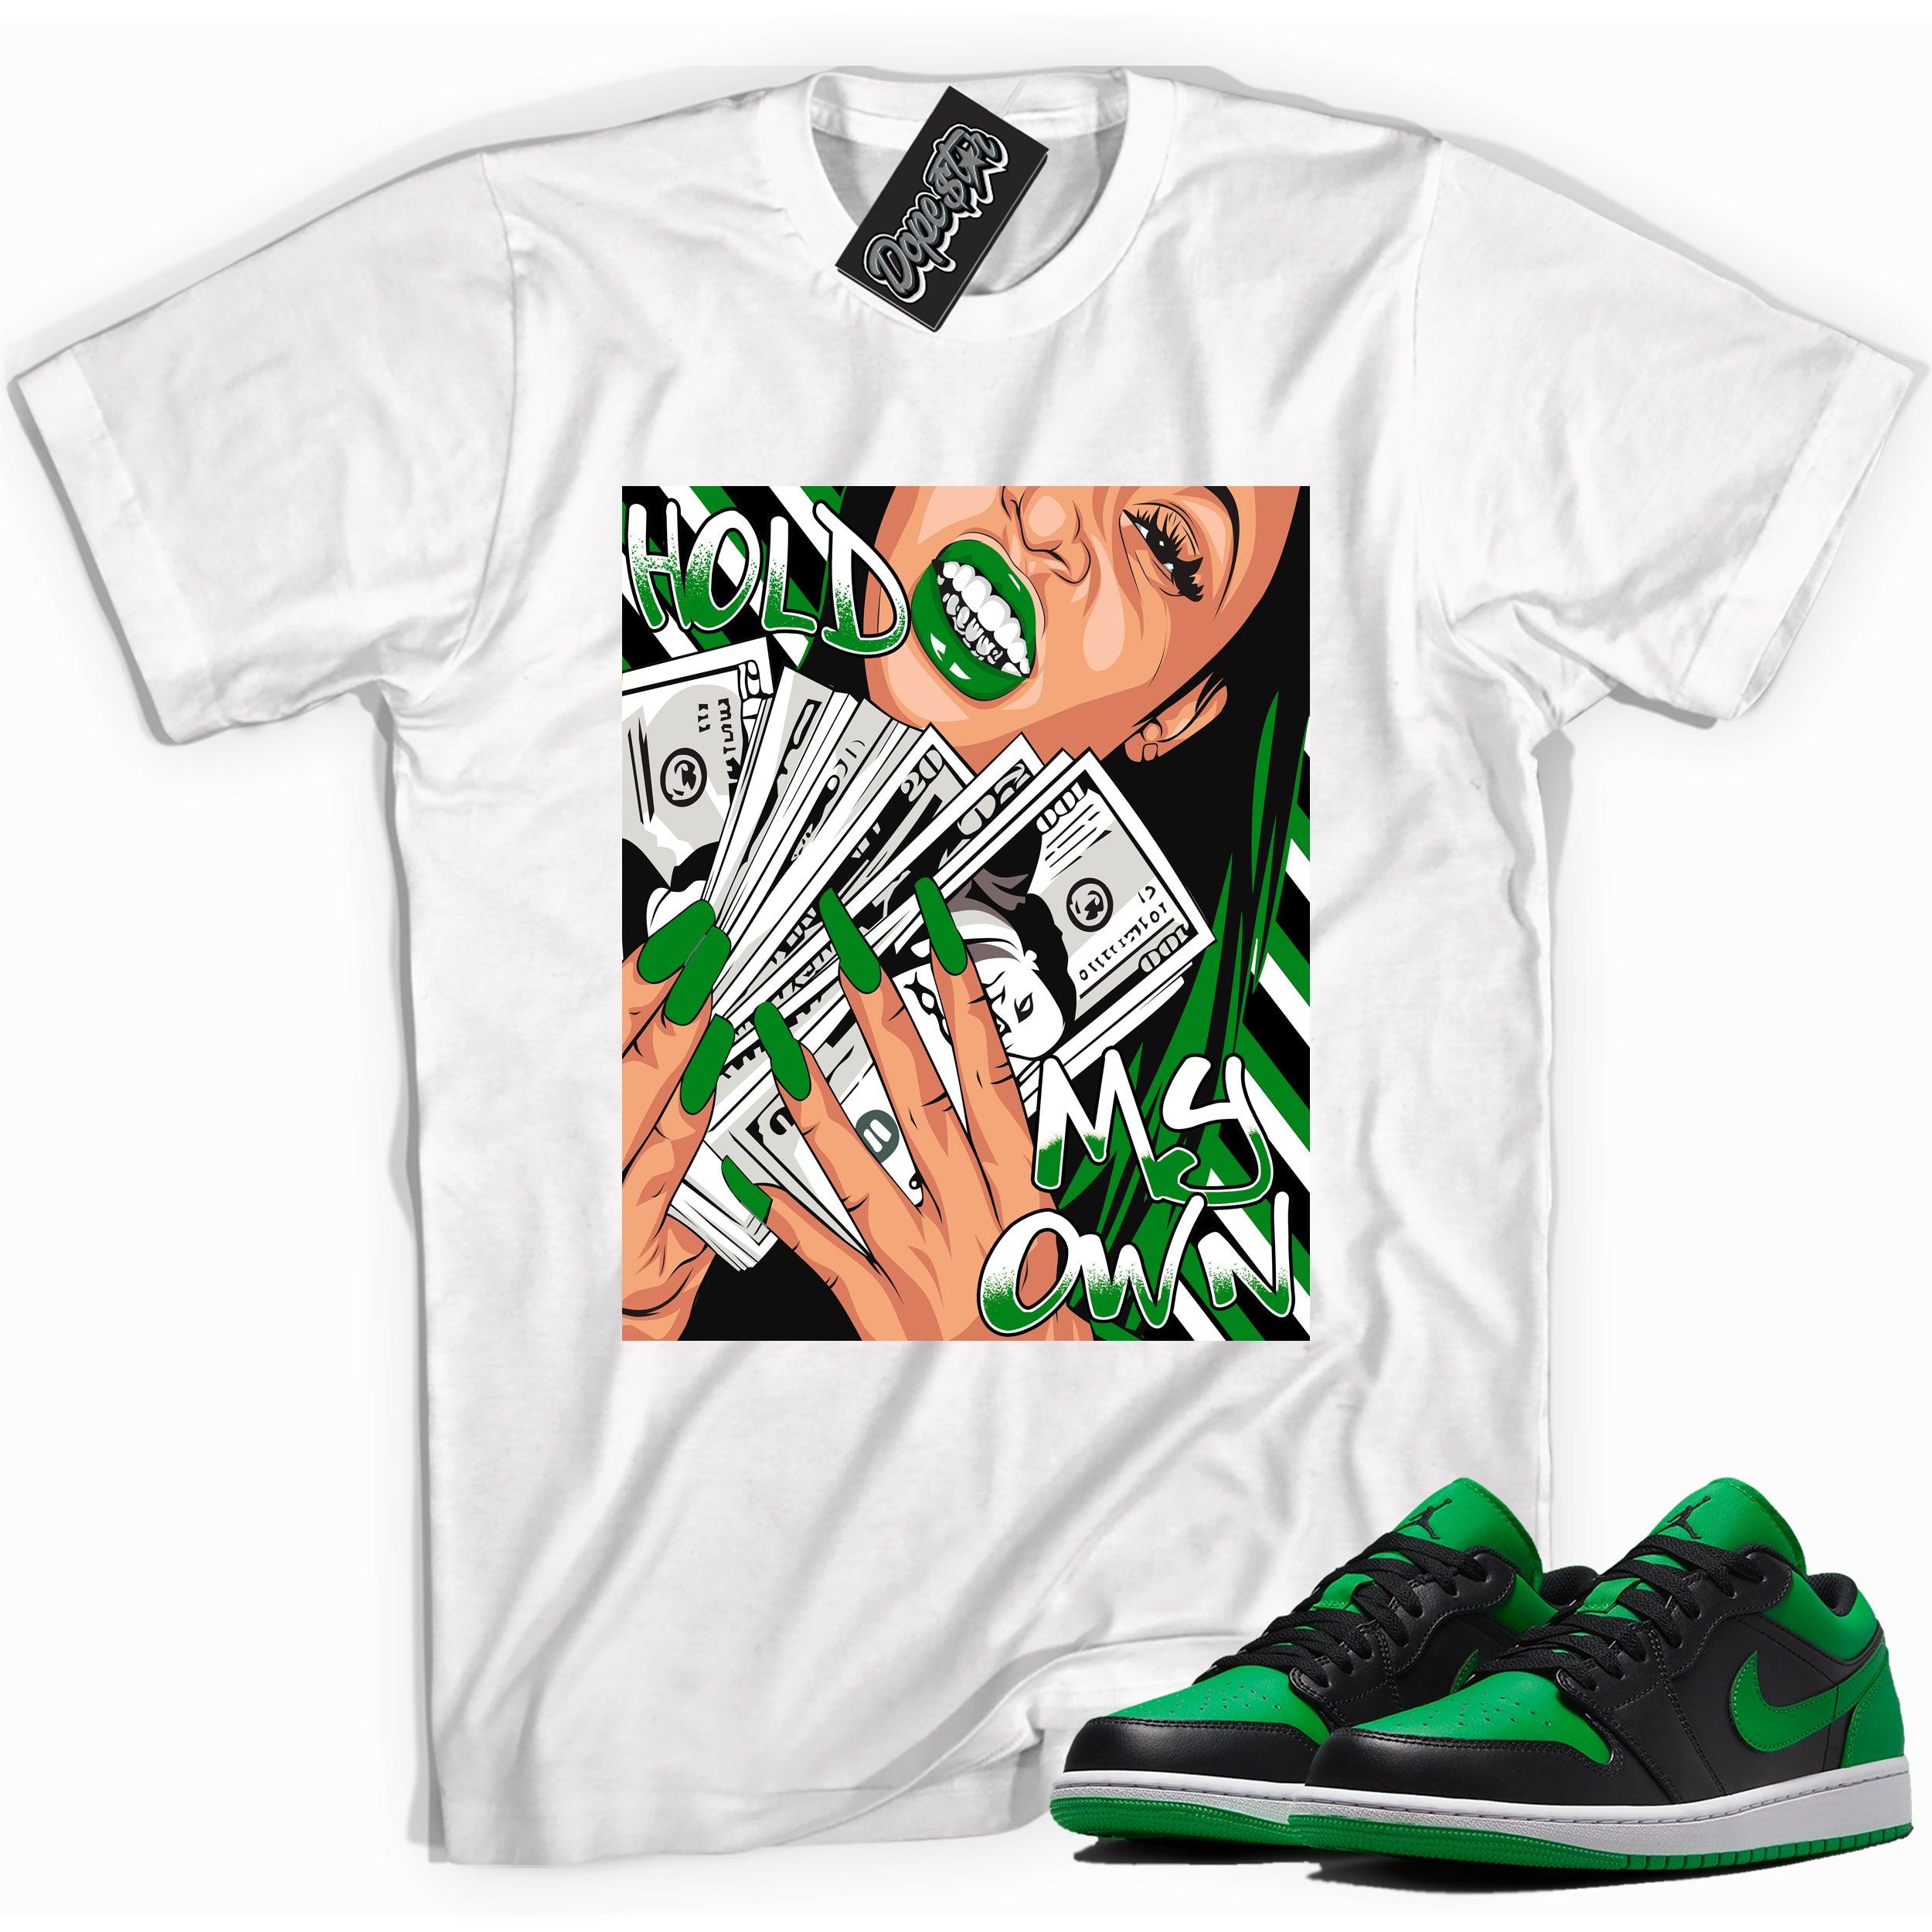 Cool white graphic tee with 'Hold My Own' print, that perfectly matches Air Jordan 1 Low Lucky Green sneakers